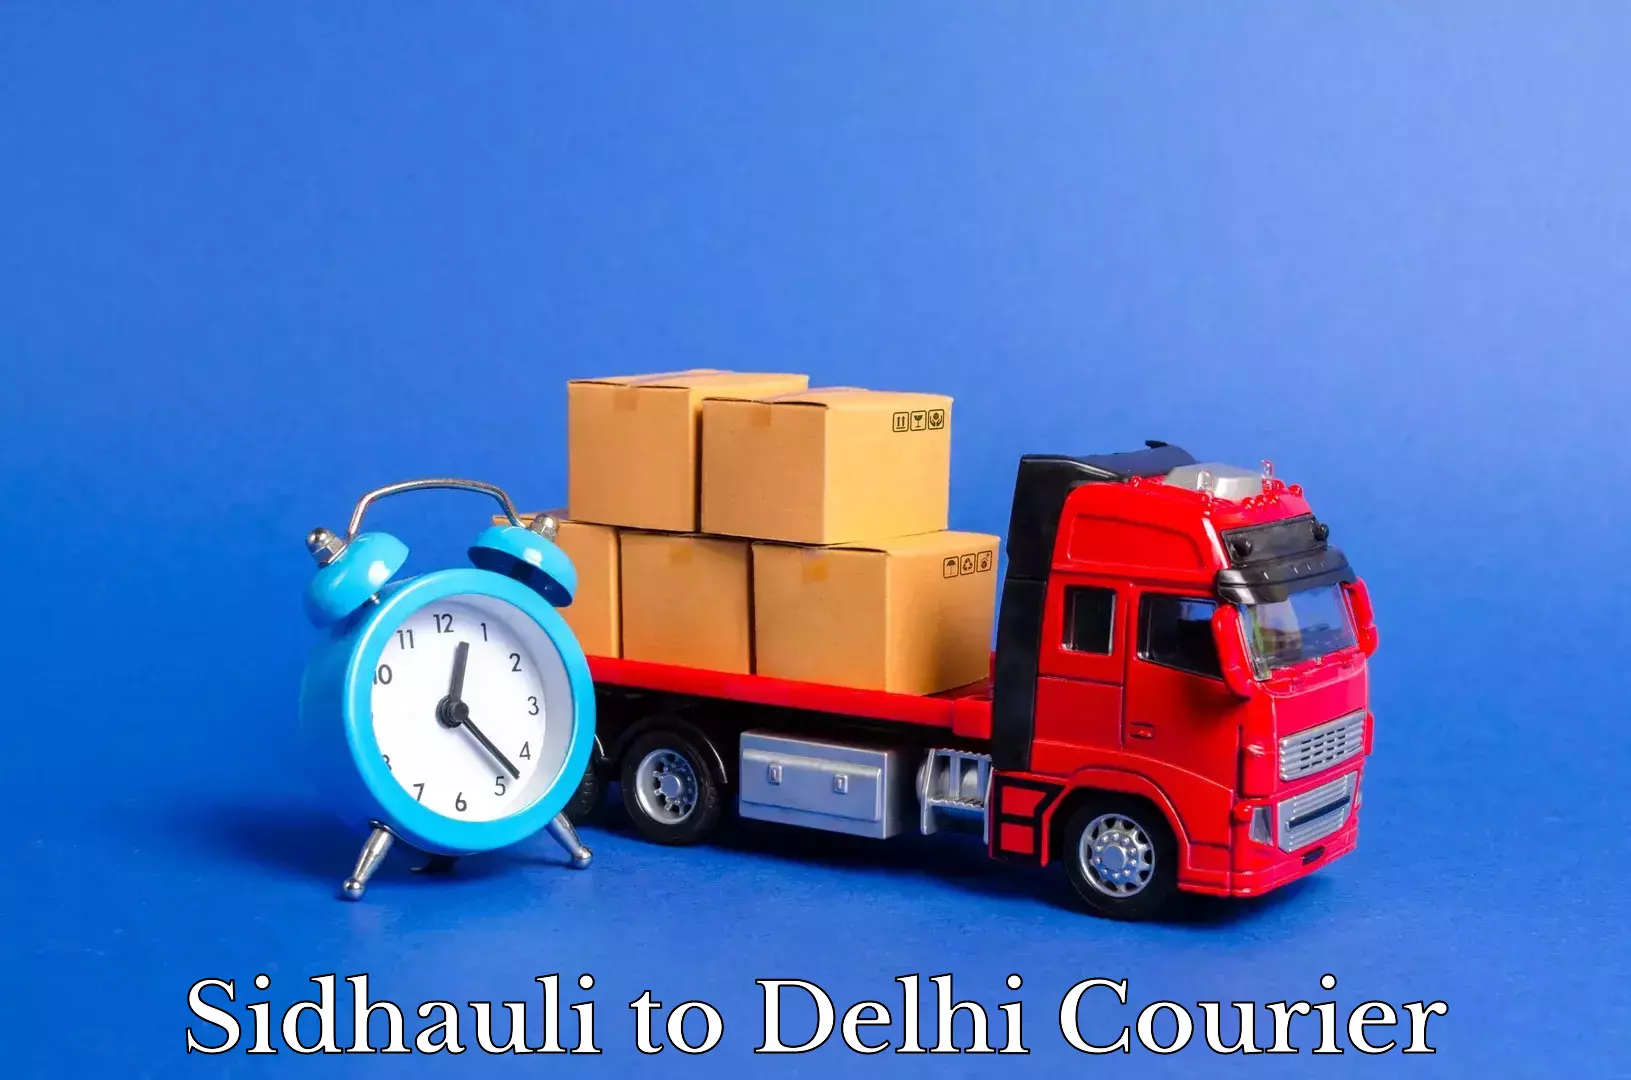 Residential moving experts Sidhauli to Delhi